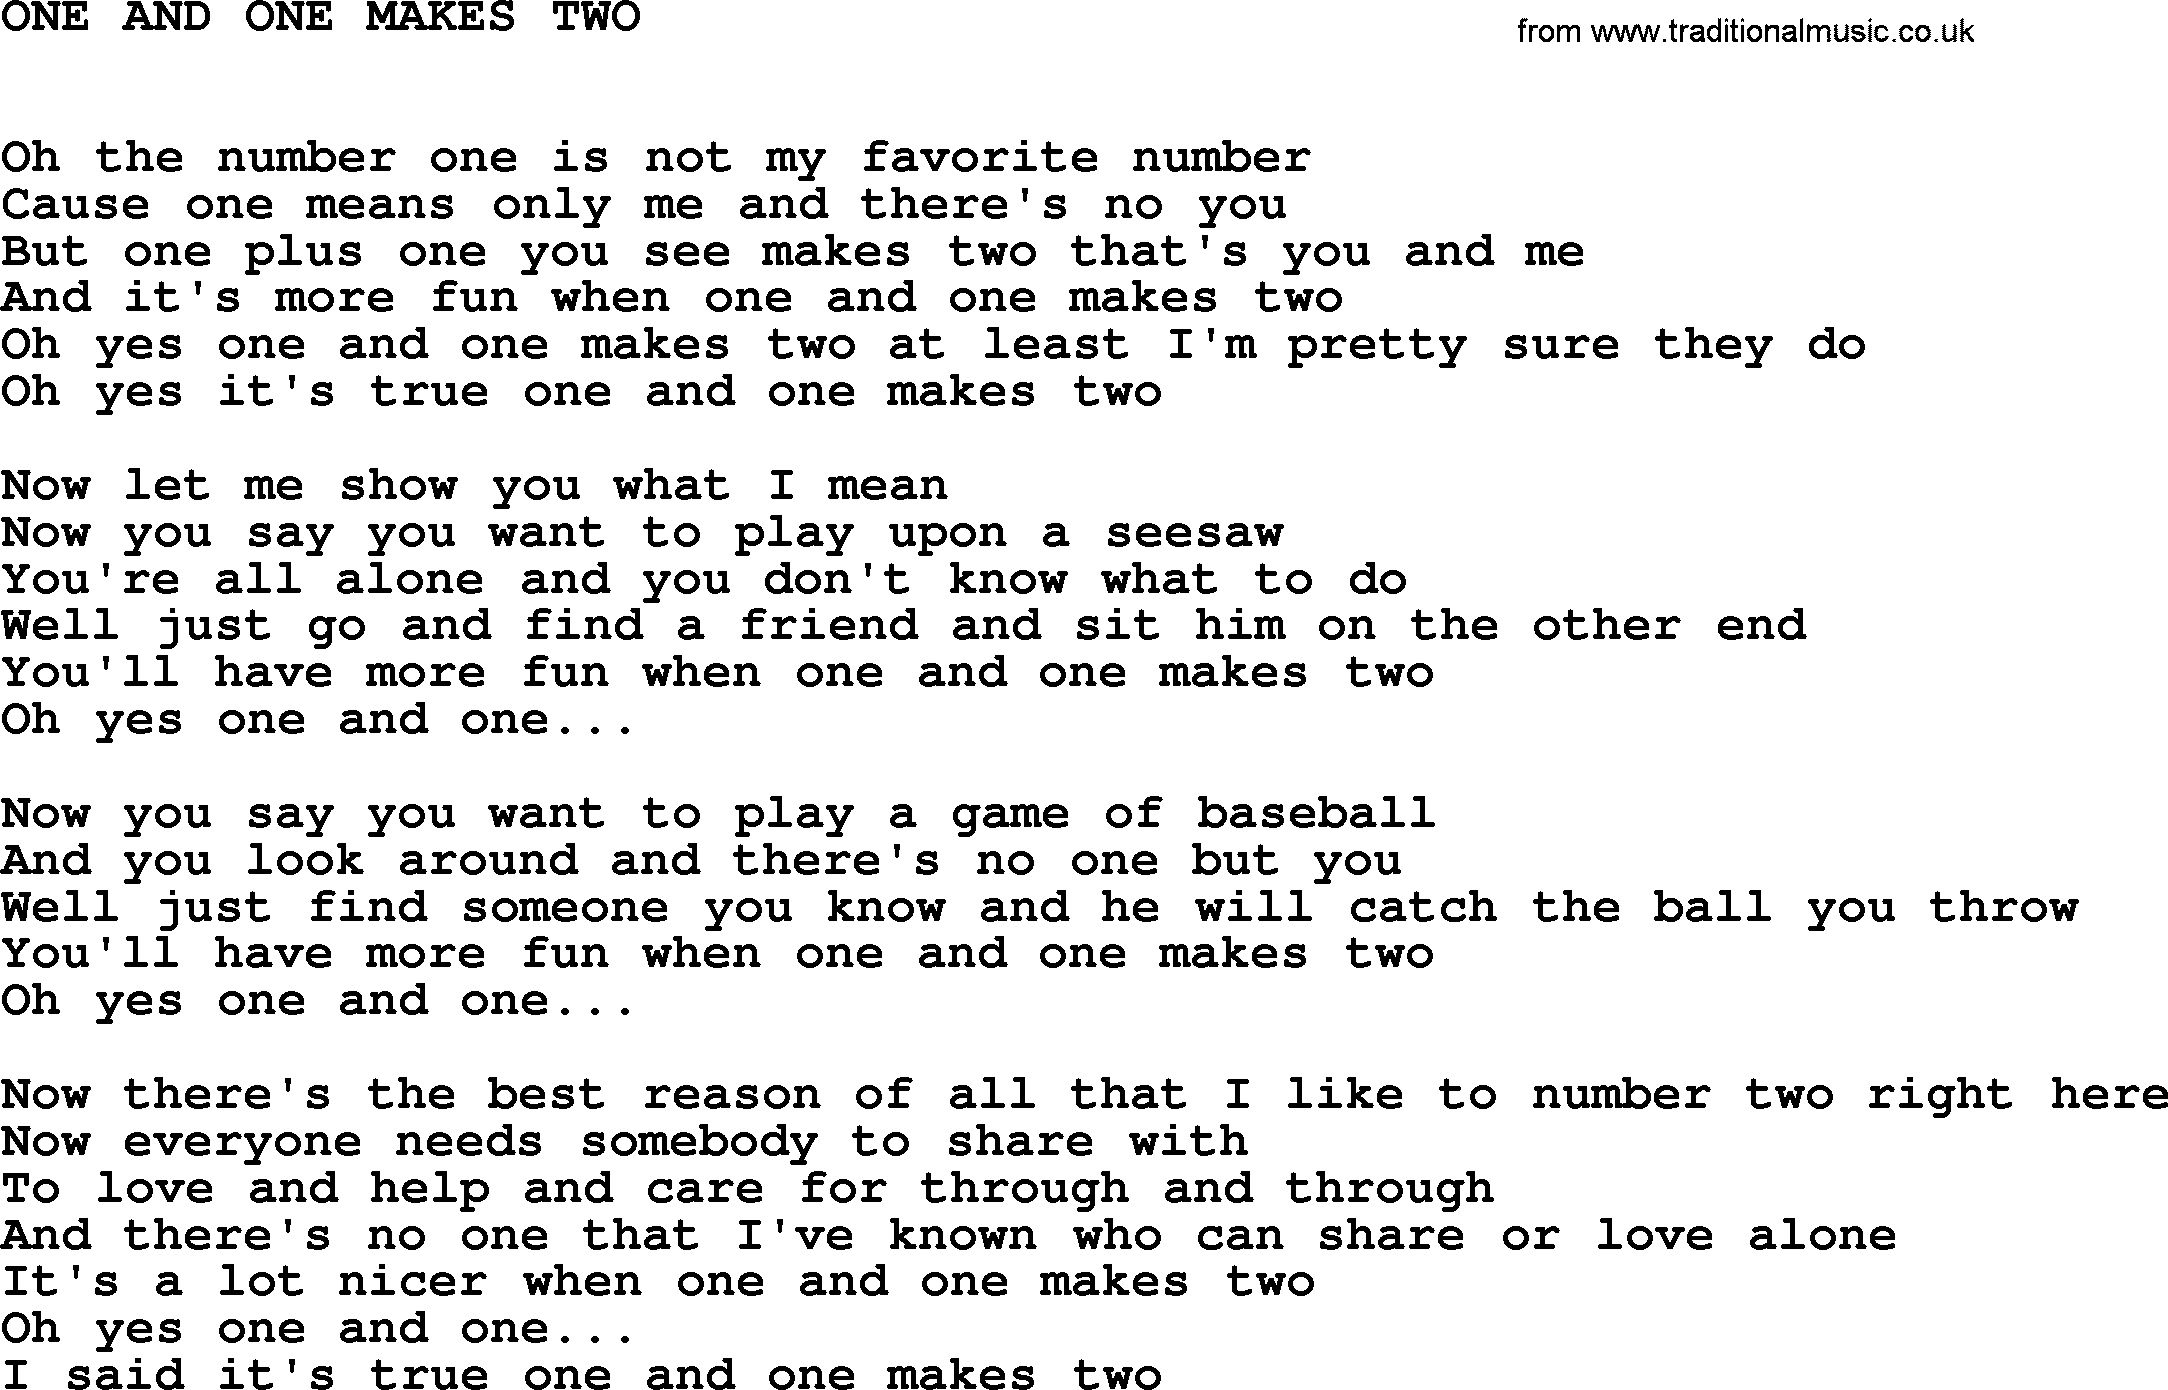 Johnny Cash song One And One Makes Two.txt lyrics